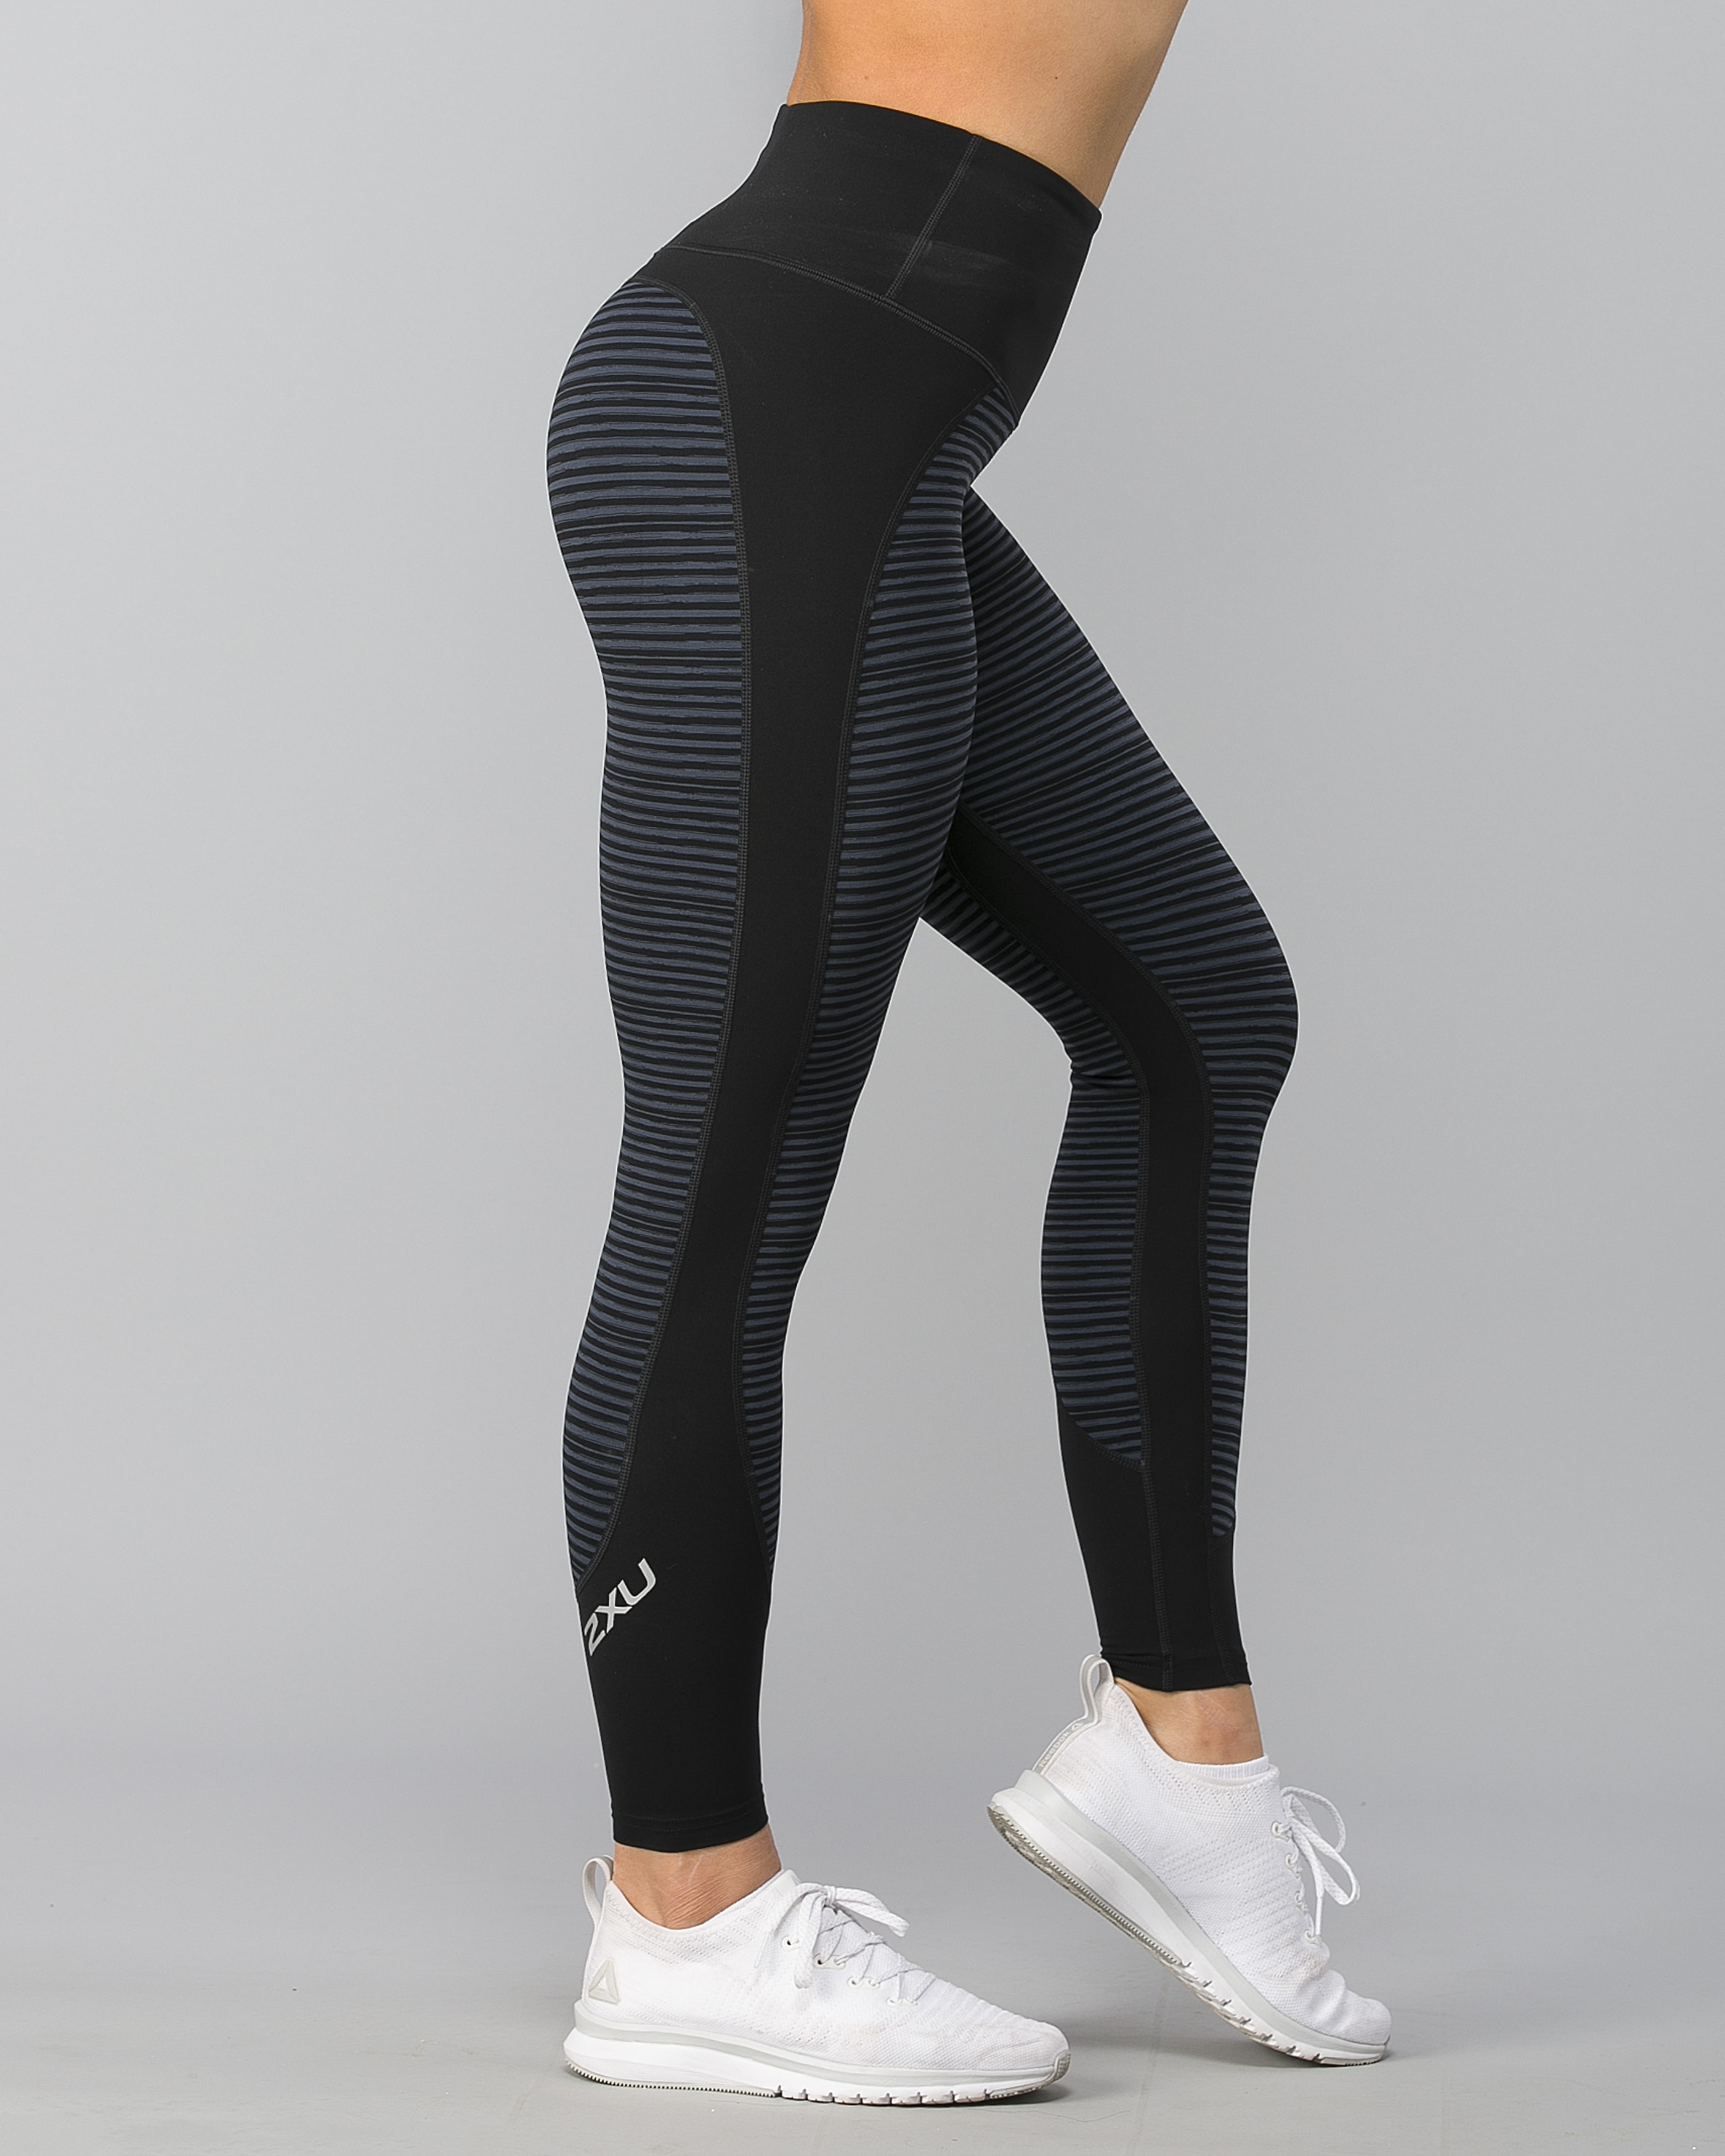 2XU Print Fitness Hi-Rise Comp Tights - Black/Outer Space Stripe